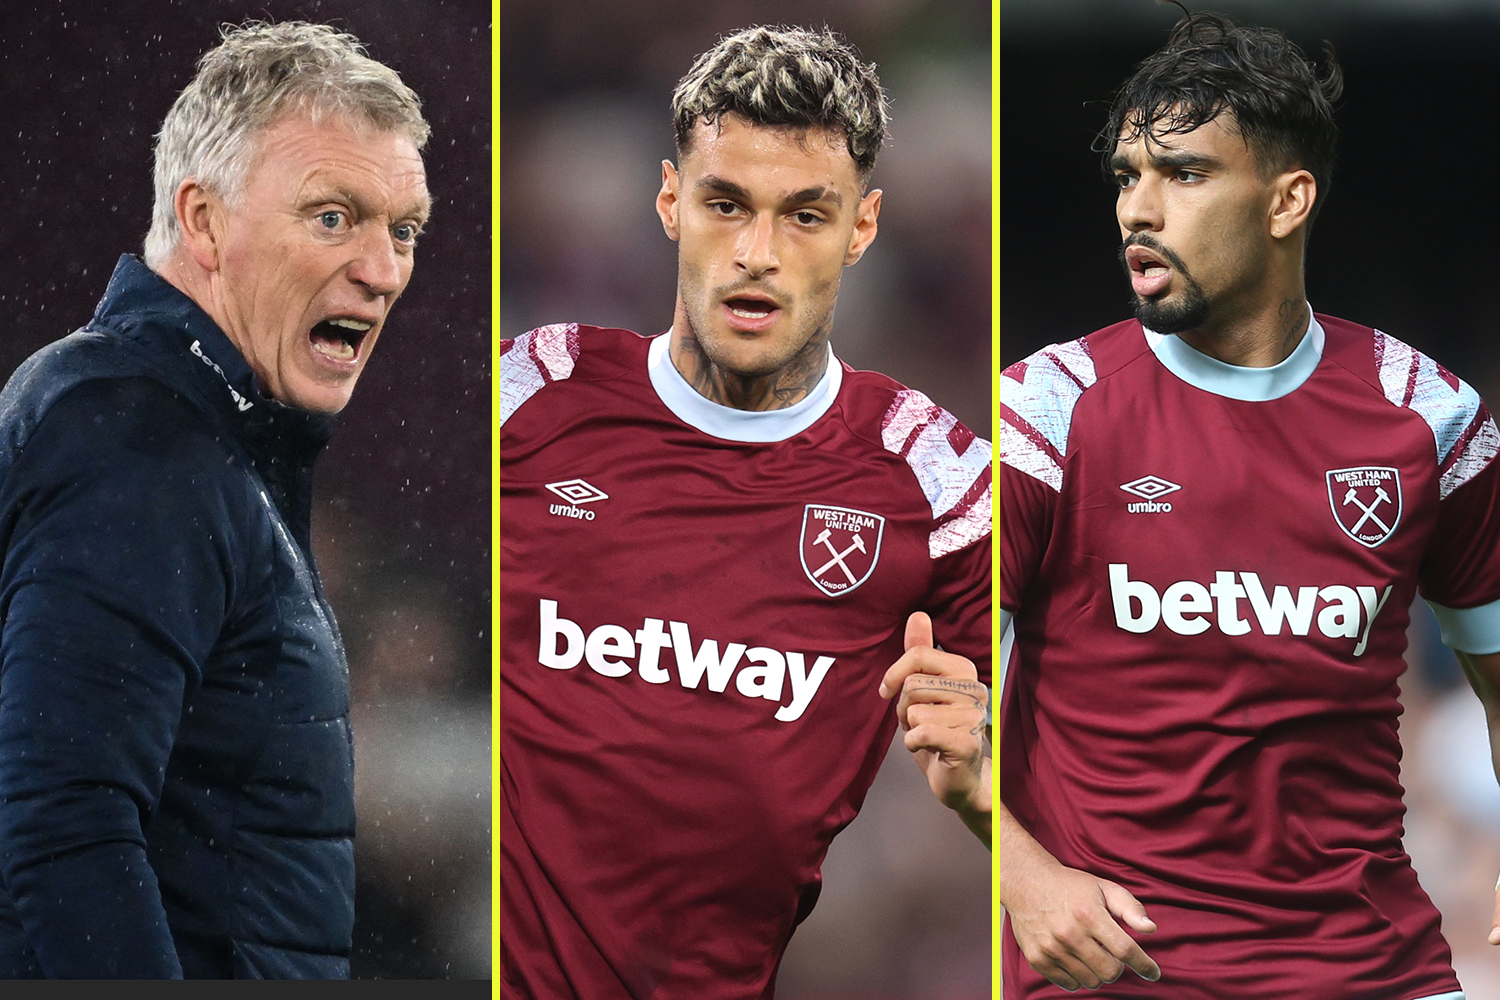 West Ham coach ‘clashed’ with David Moyes, no transfers, and players open to leaving - but Hammers fans told 'not to panic'